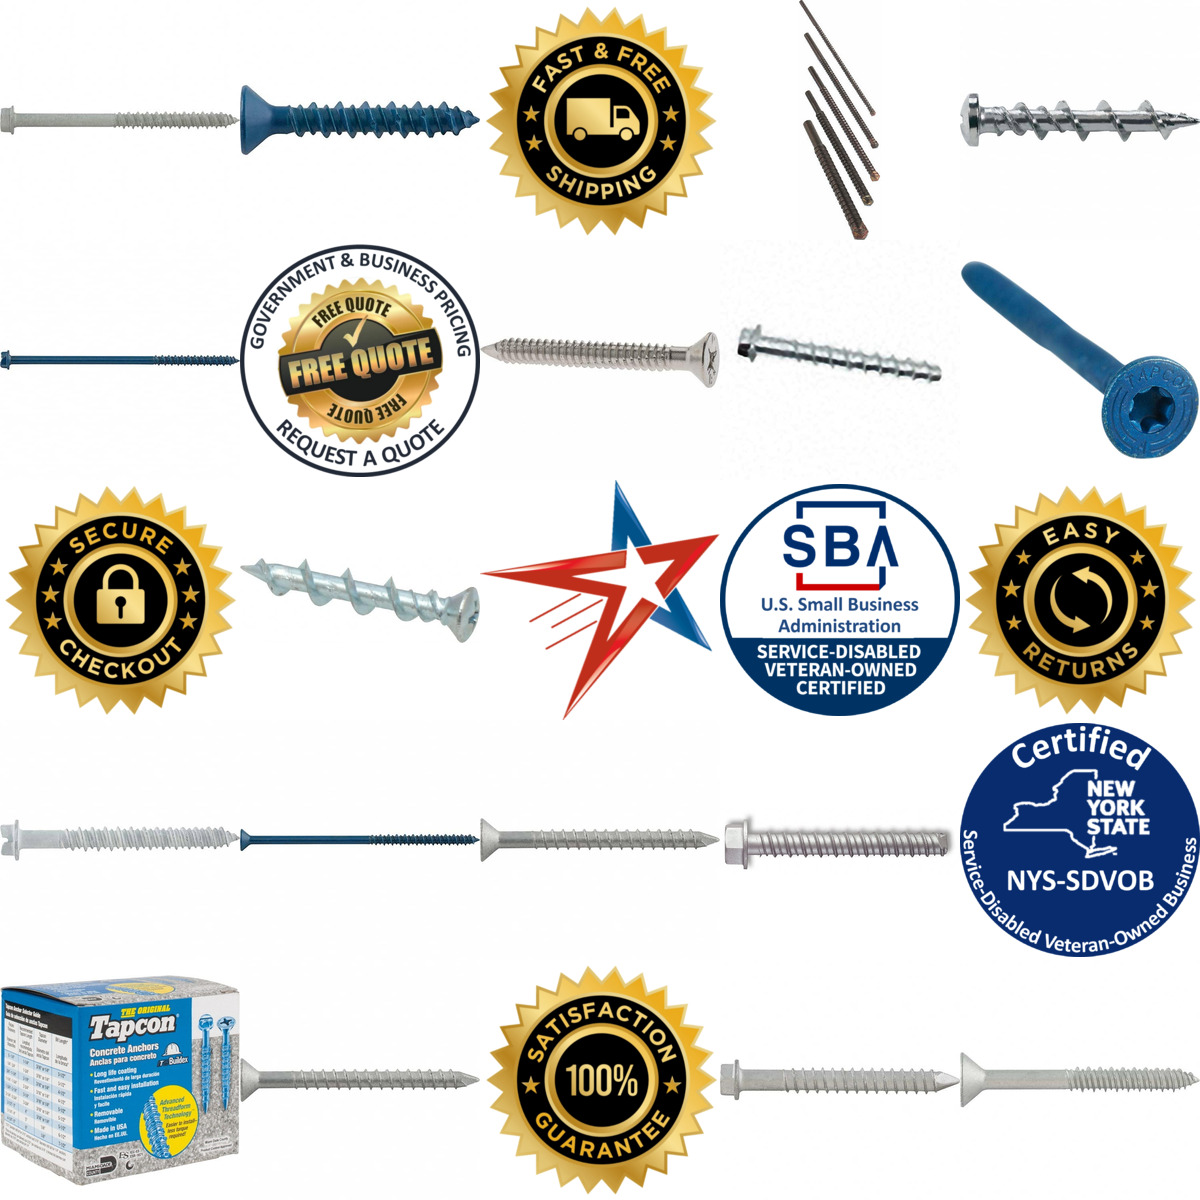 A selection of Concrete Screws and Masonry Fasteners products on GoVets